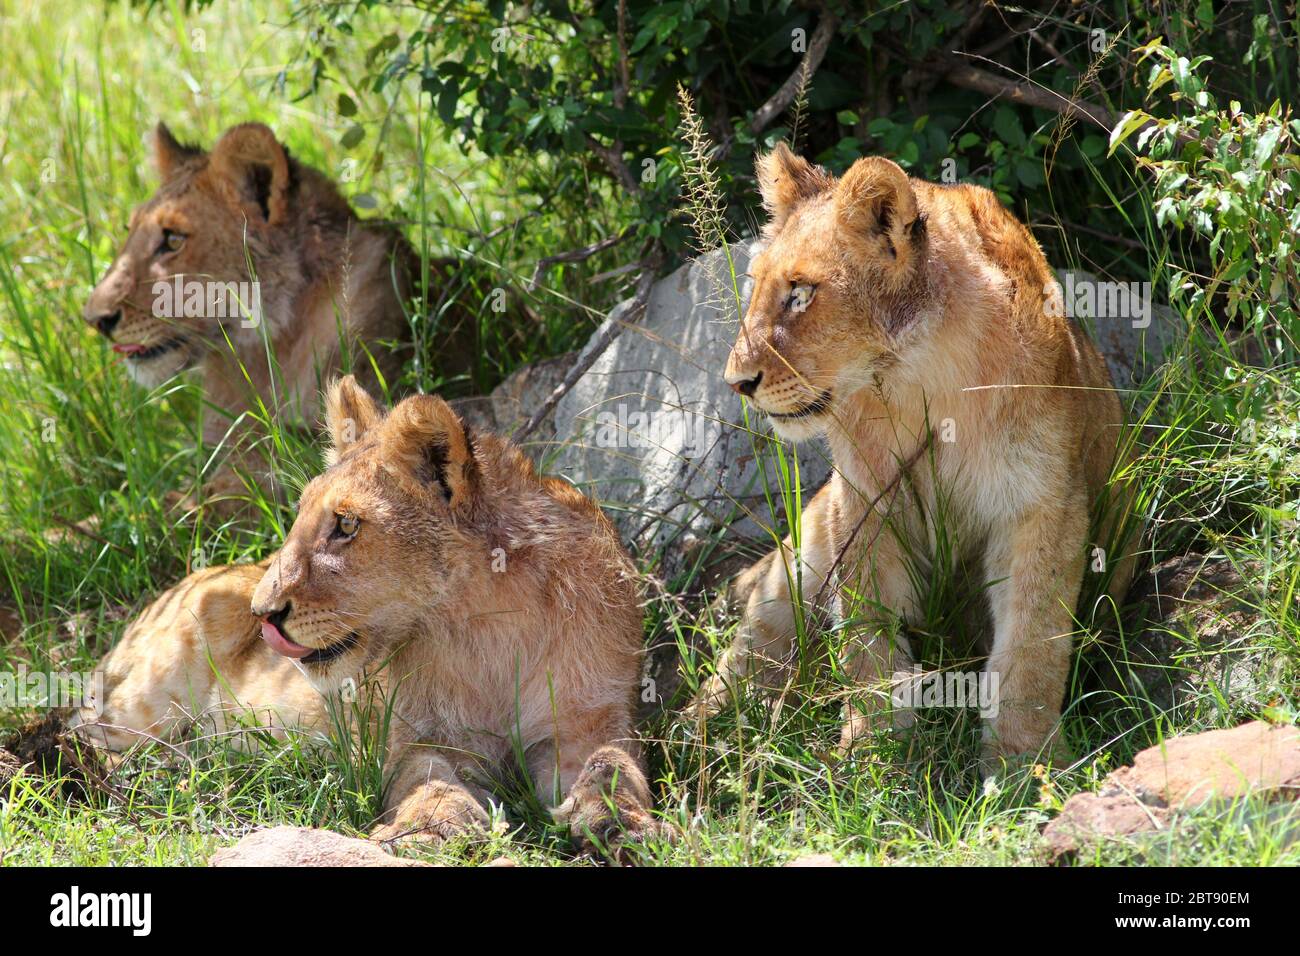 Young lions in the shade and shelter of a bush look interested and excited in the same direction Stock Photo